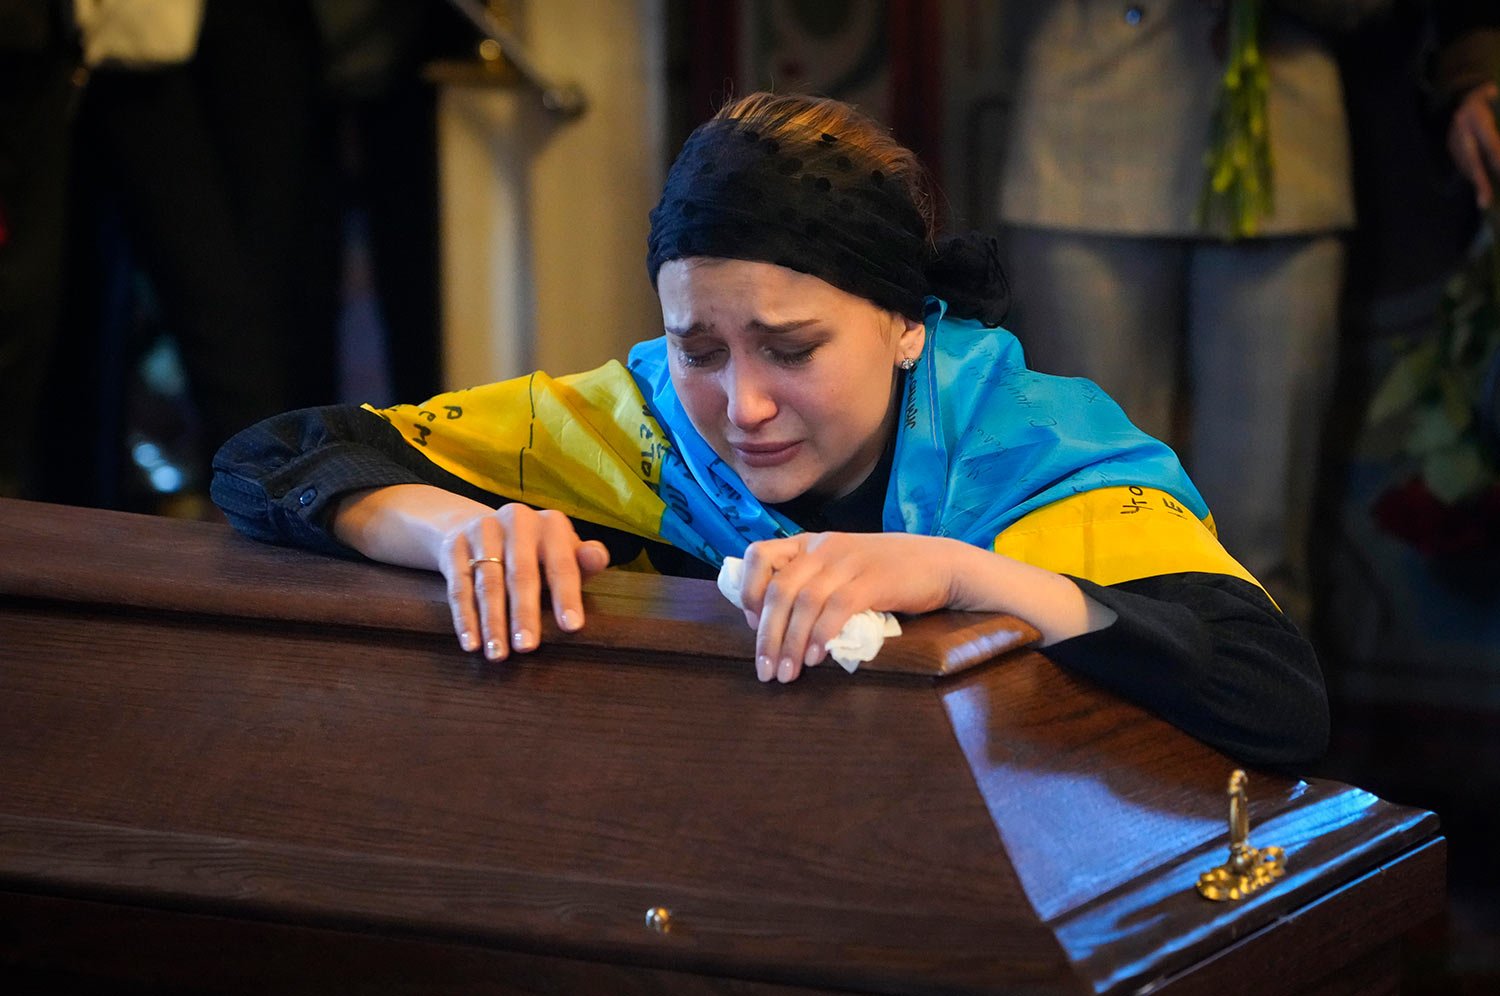  The widow cries at the coffin of volunteer soldier Oleksandr Makhov, 36 a well-known Ukrainian journalist, killed by the Russian troops, at St. Michael cathedral in Kyiv, Ukraine, Monday, May 9, 2022. (AP Photo/Efrem Lukatsky) 